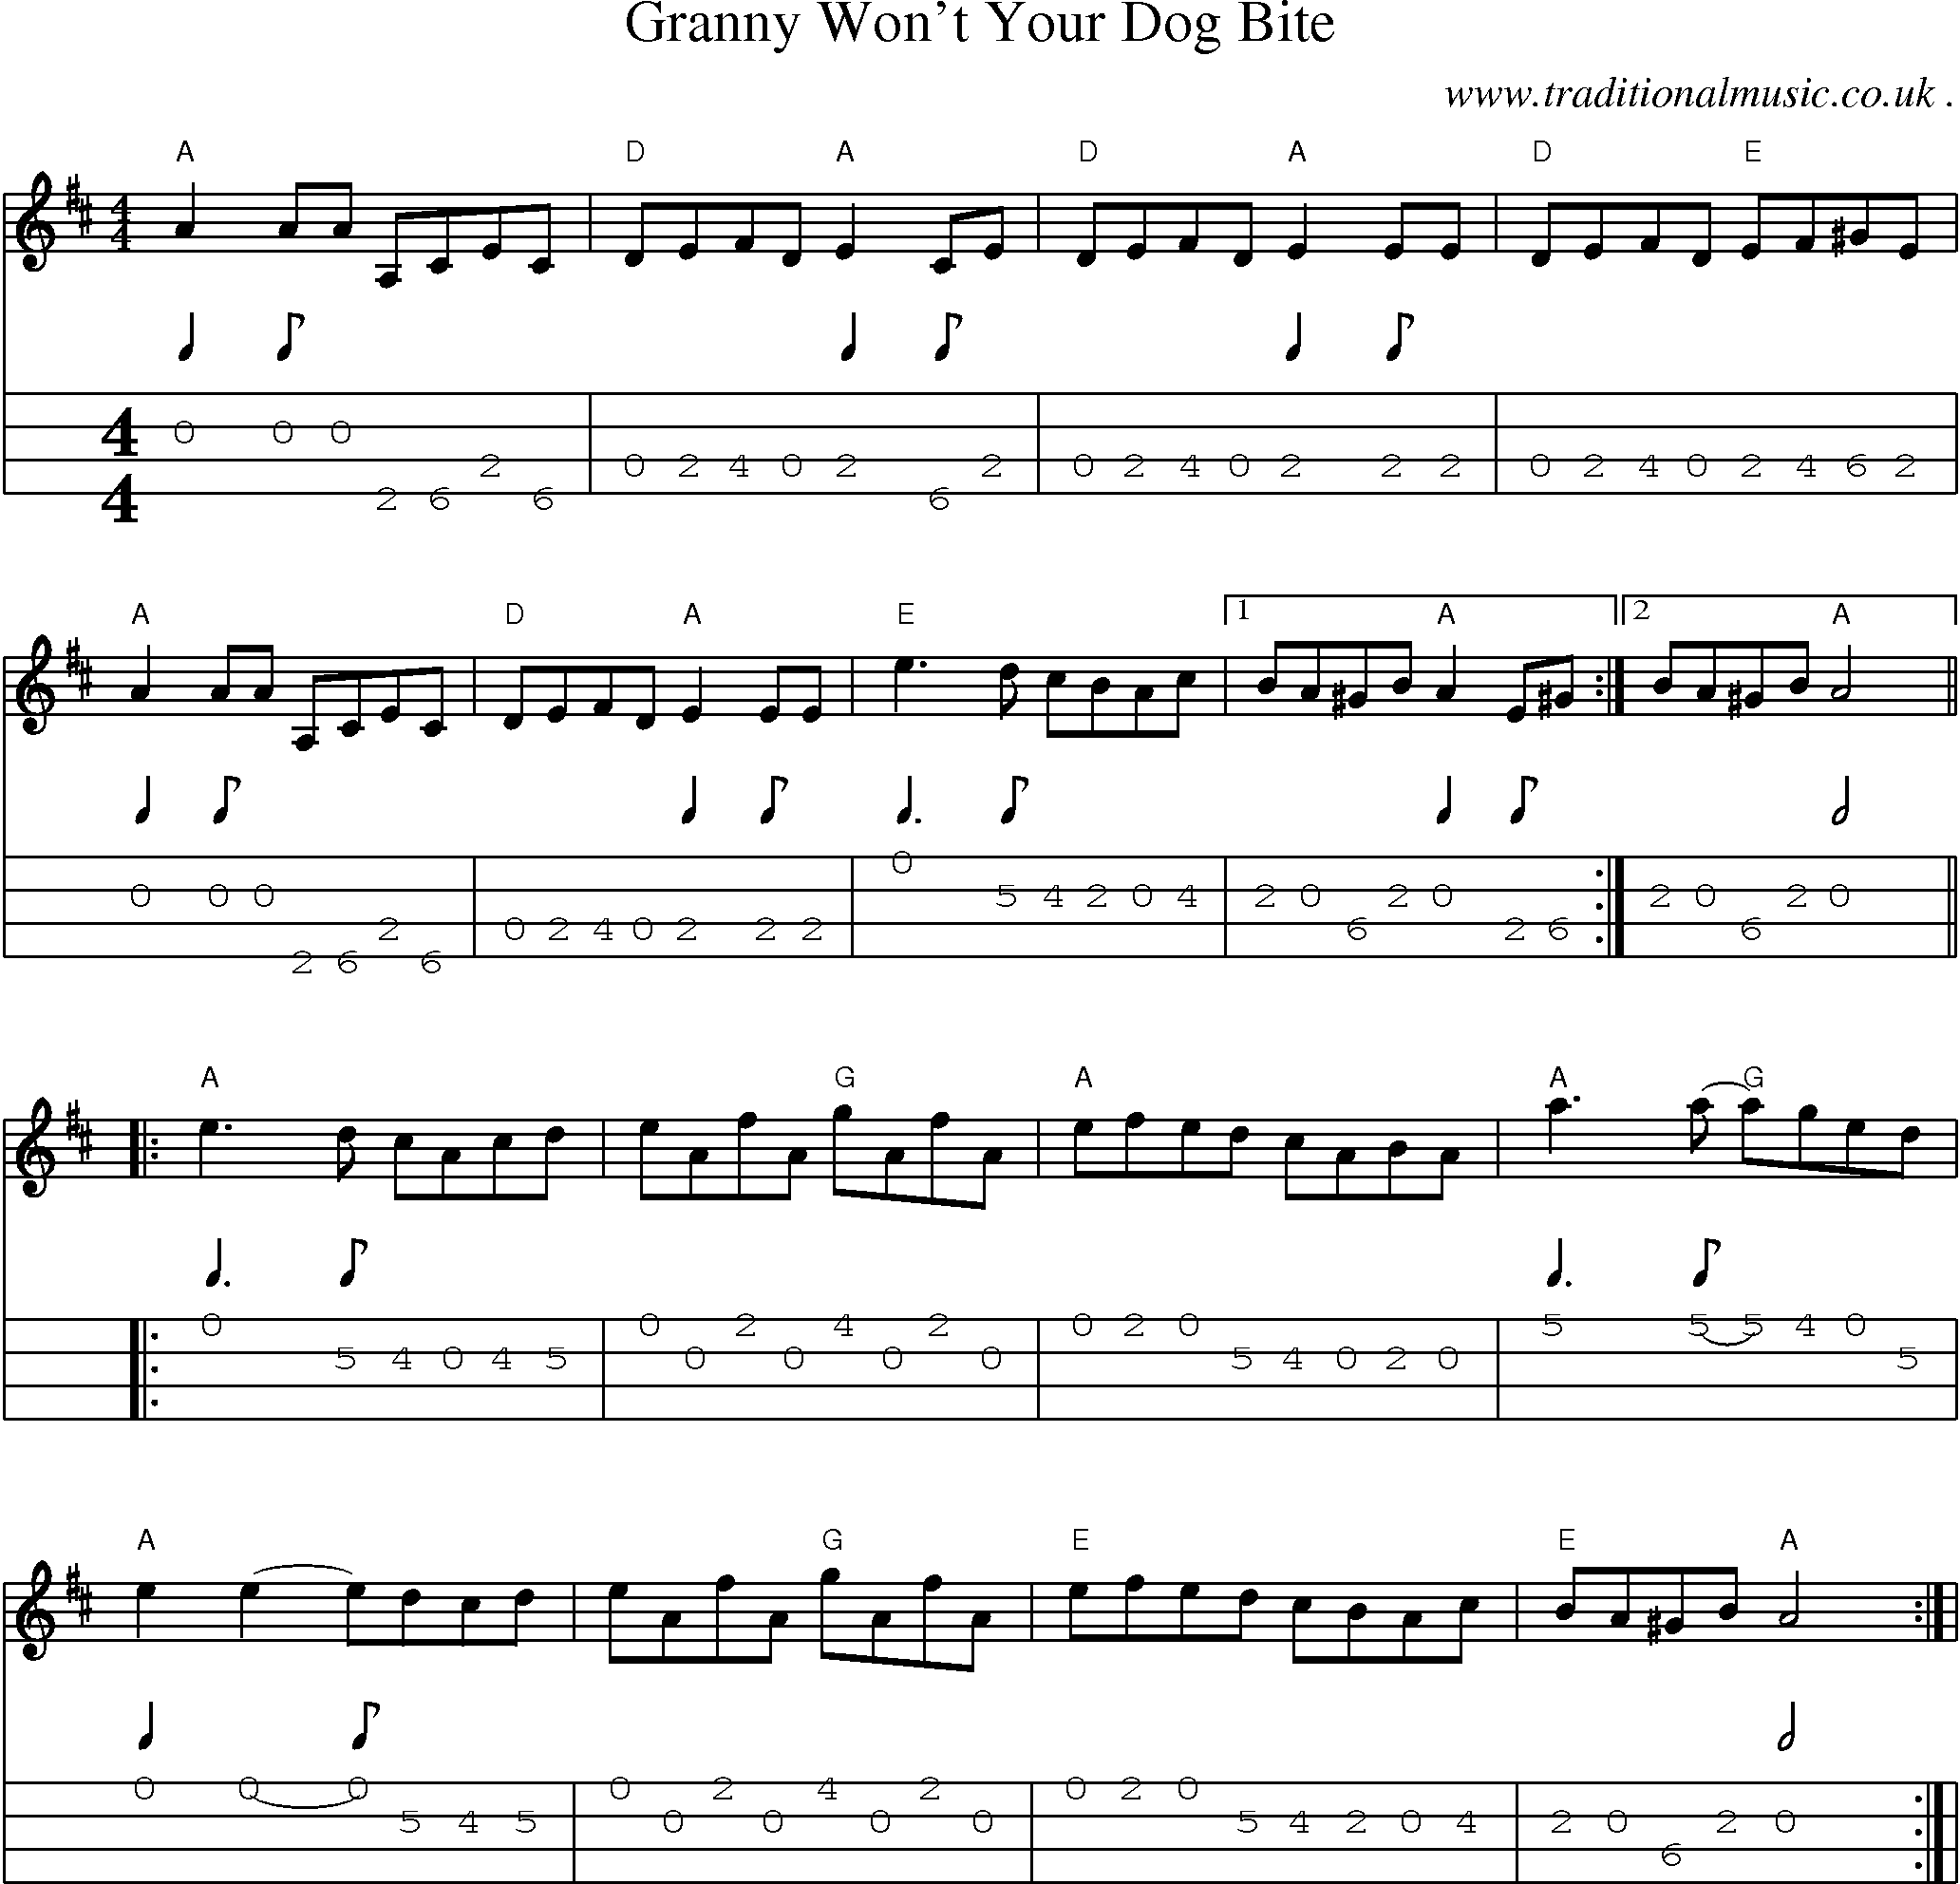 Music Score and Guitar Tabs for Granny Wont Your Dog Bite